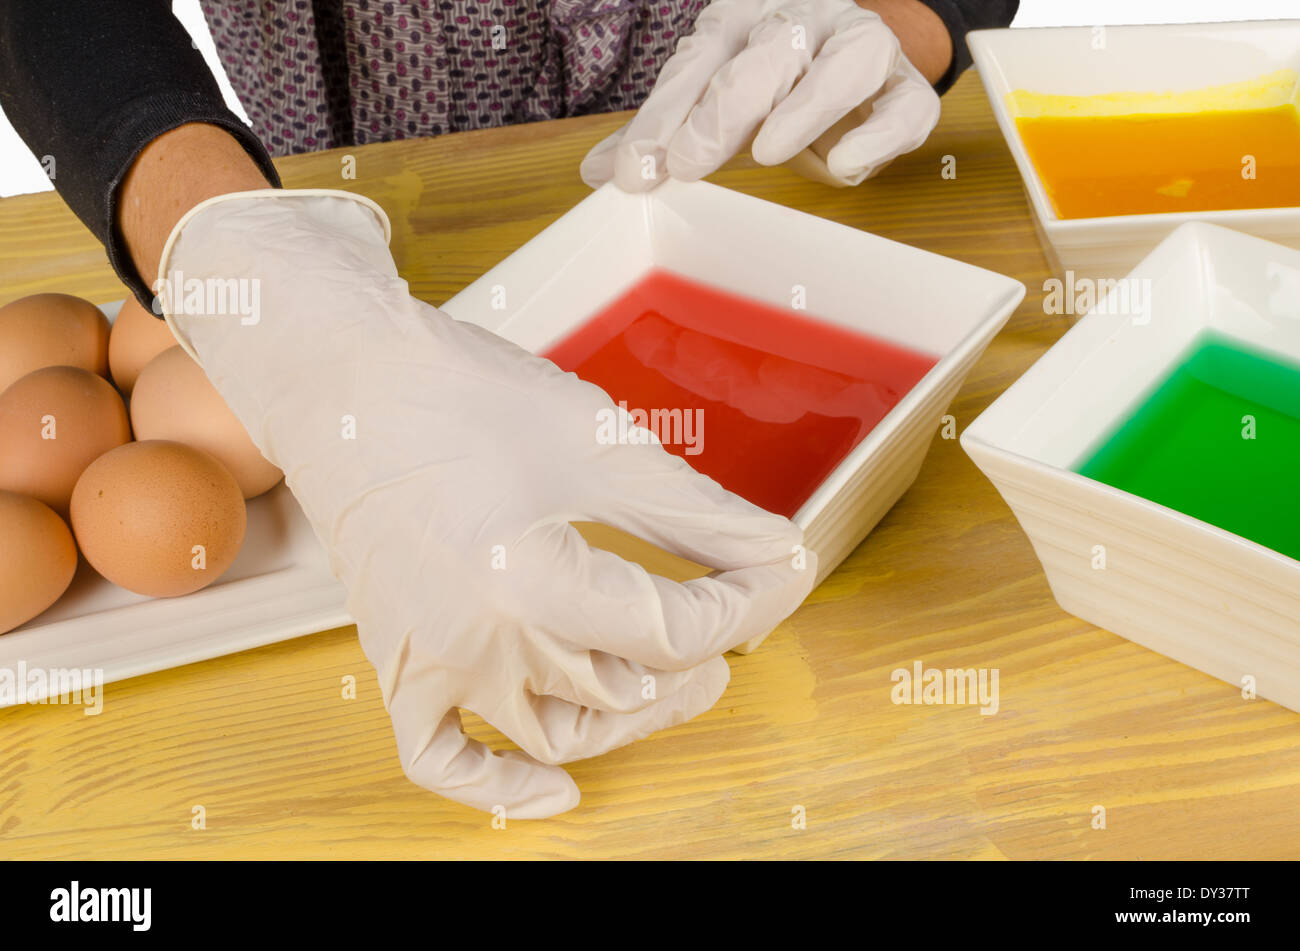 Hands with gloves getting ready to dye Easter eggs Stock Photo